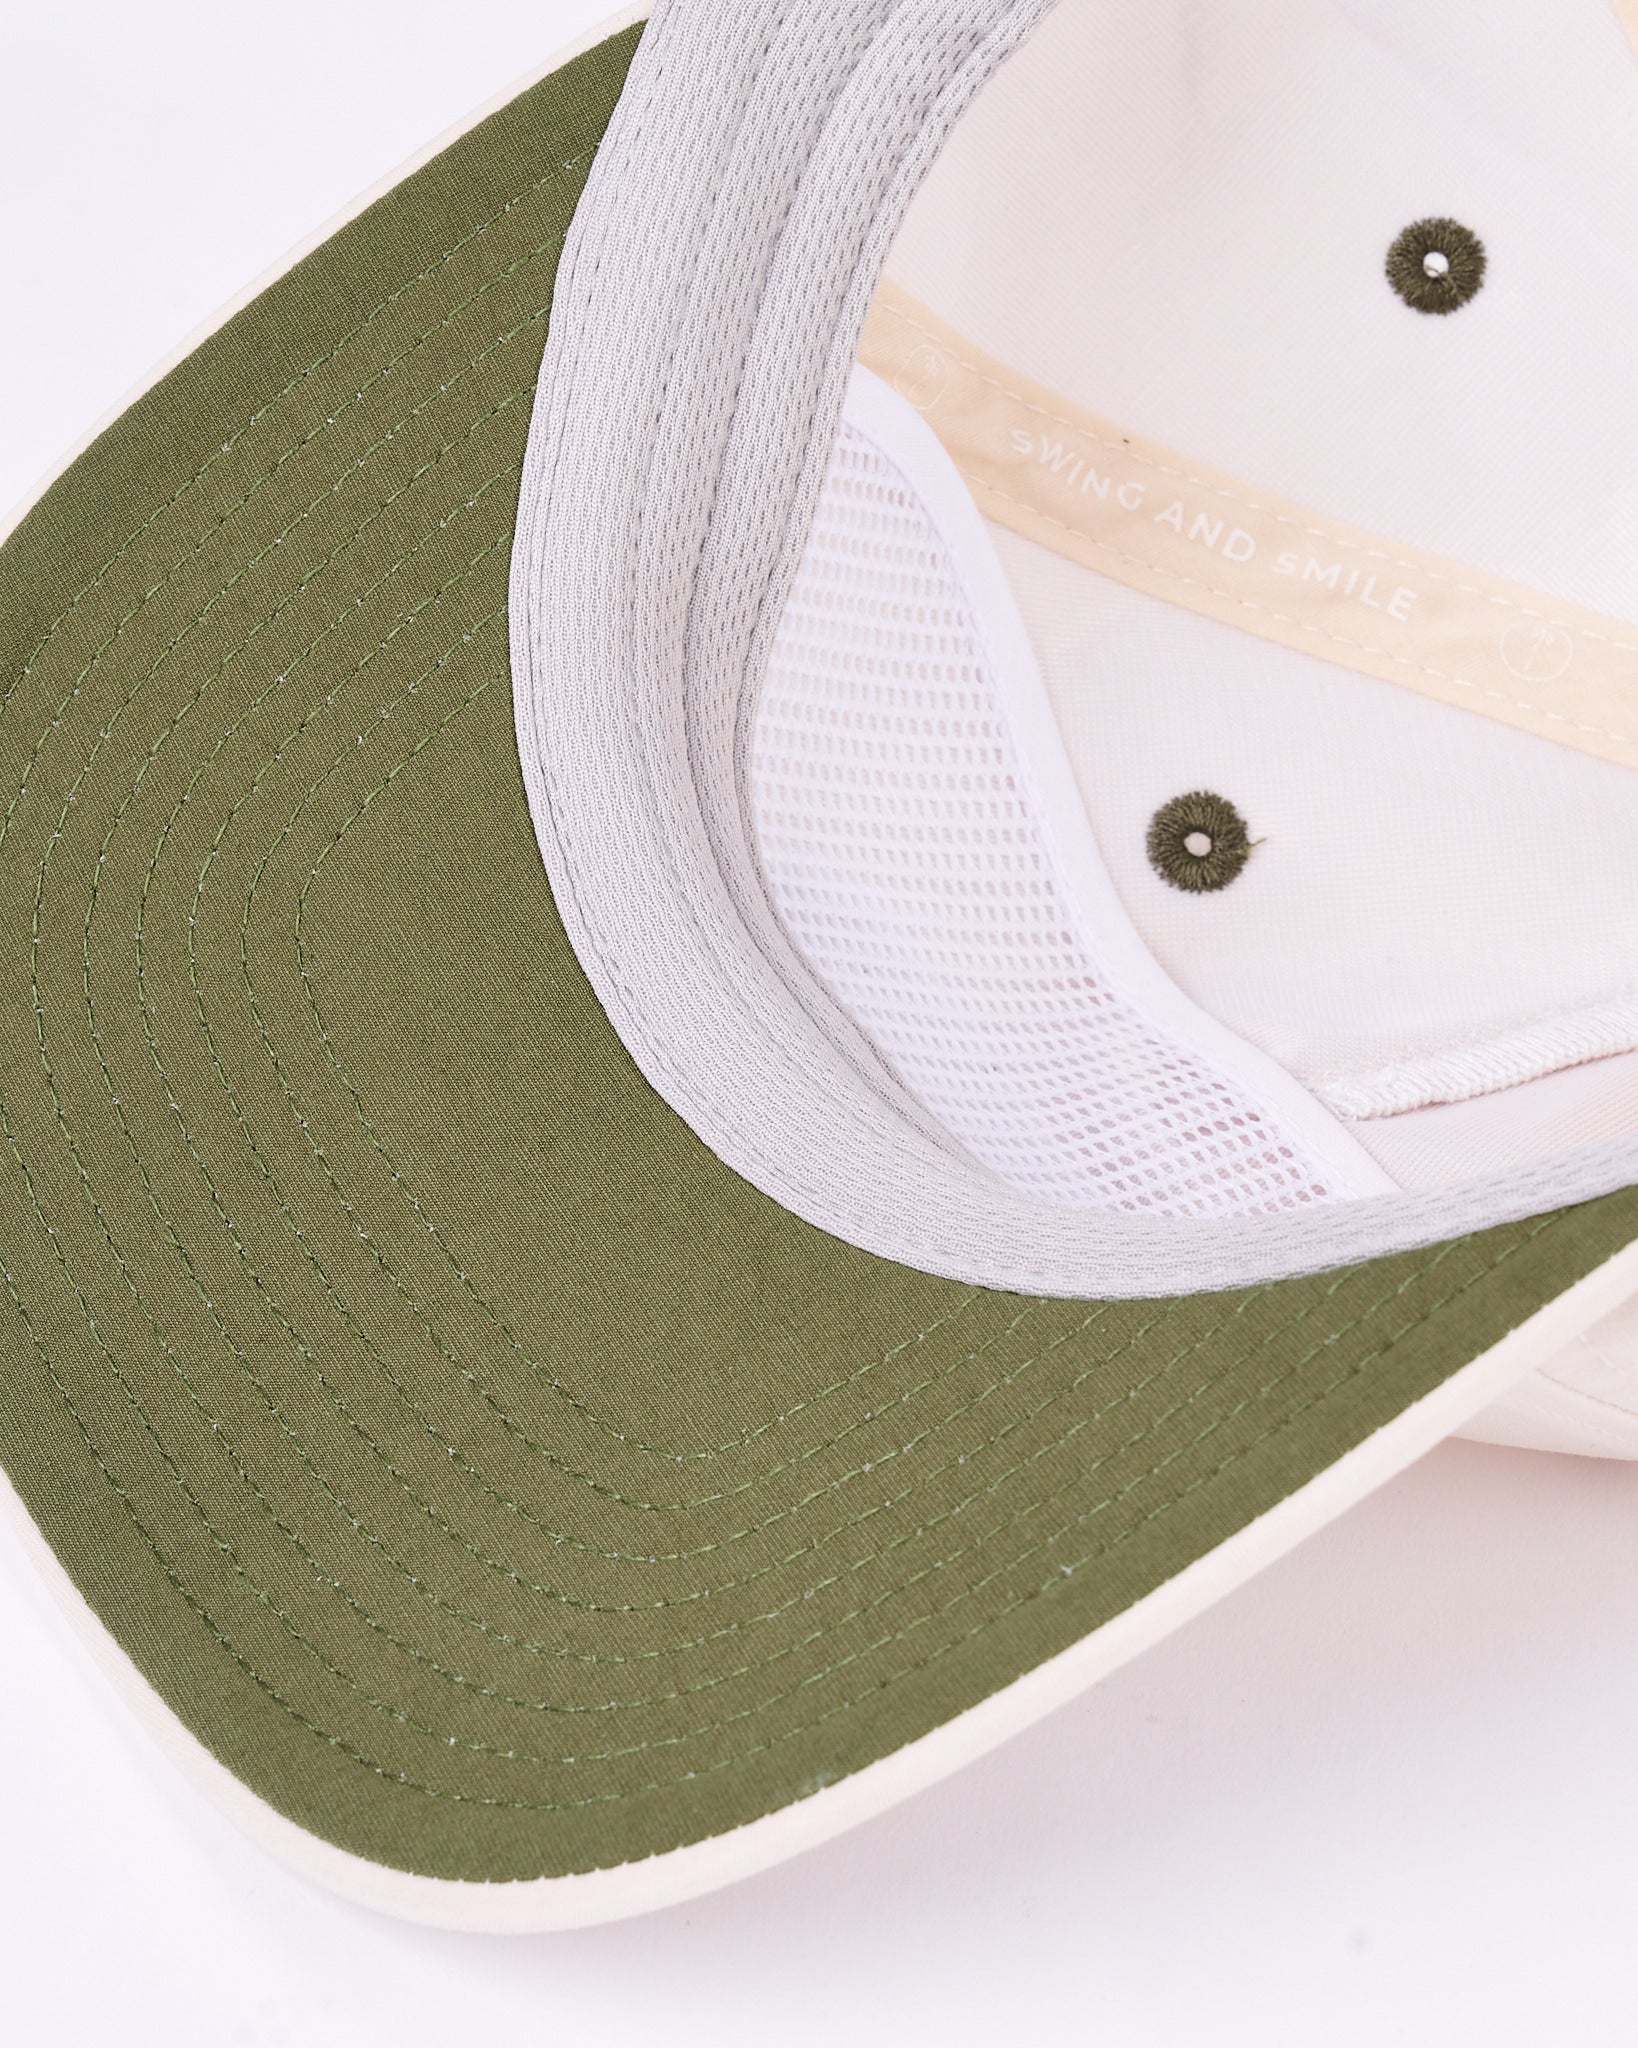 Palm Golf Co. Roadie Snapback (Unstructured)